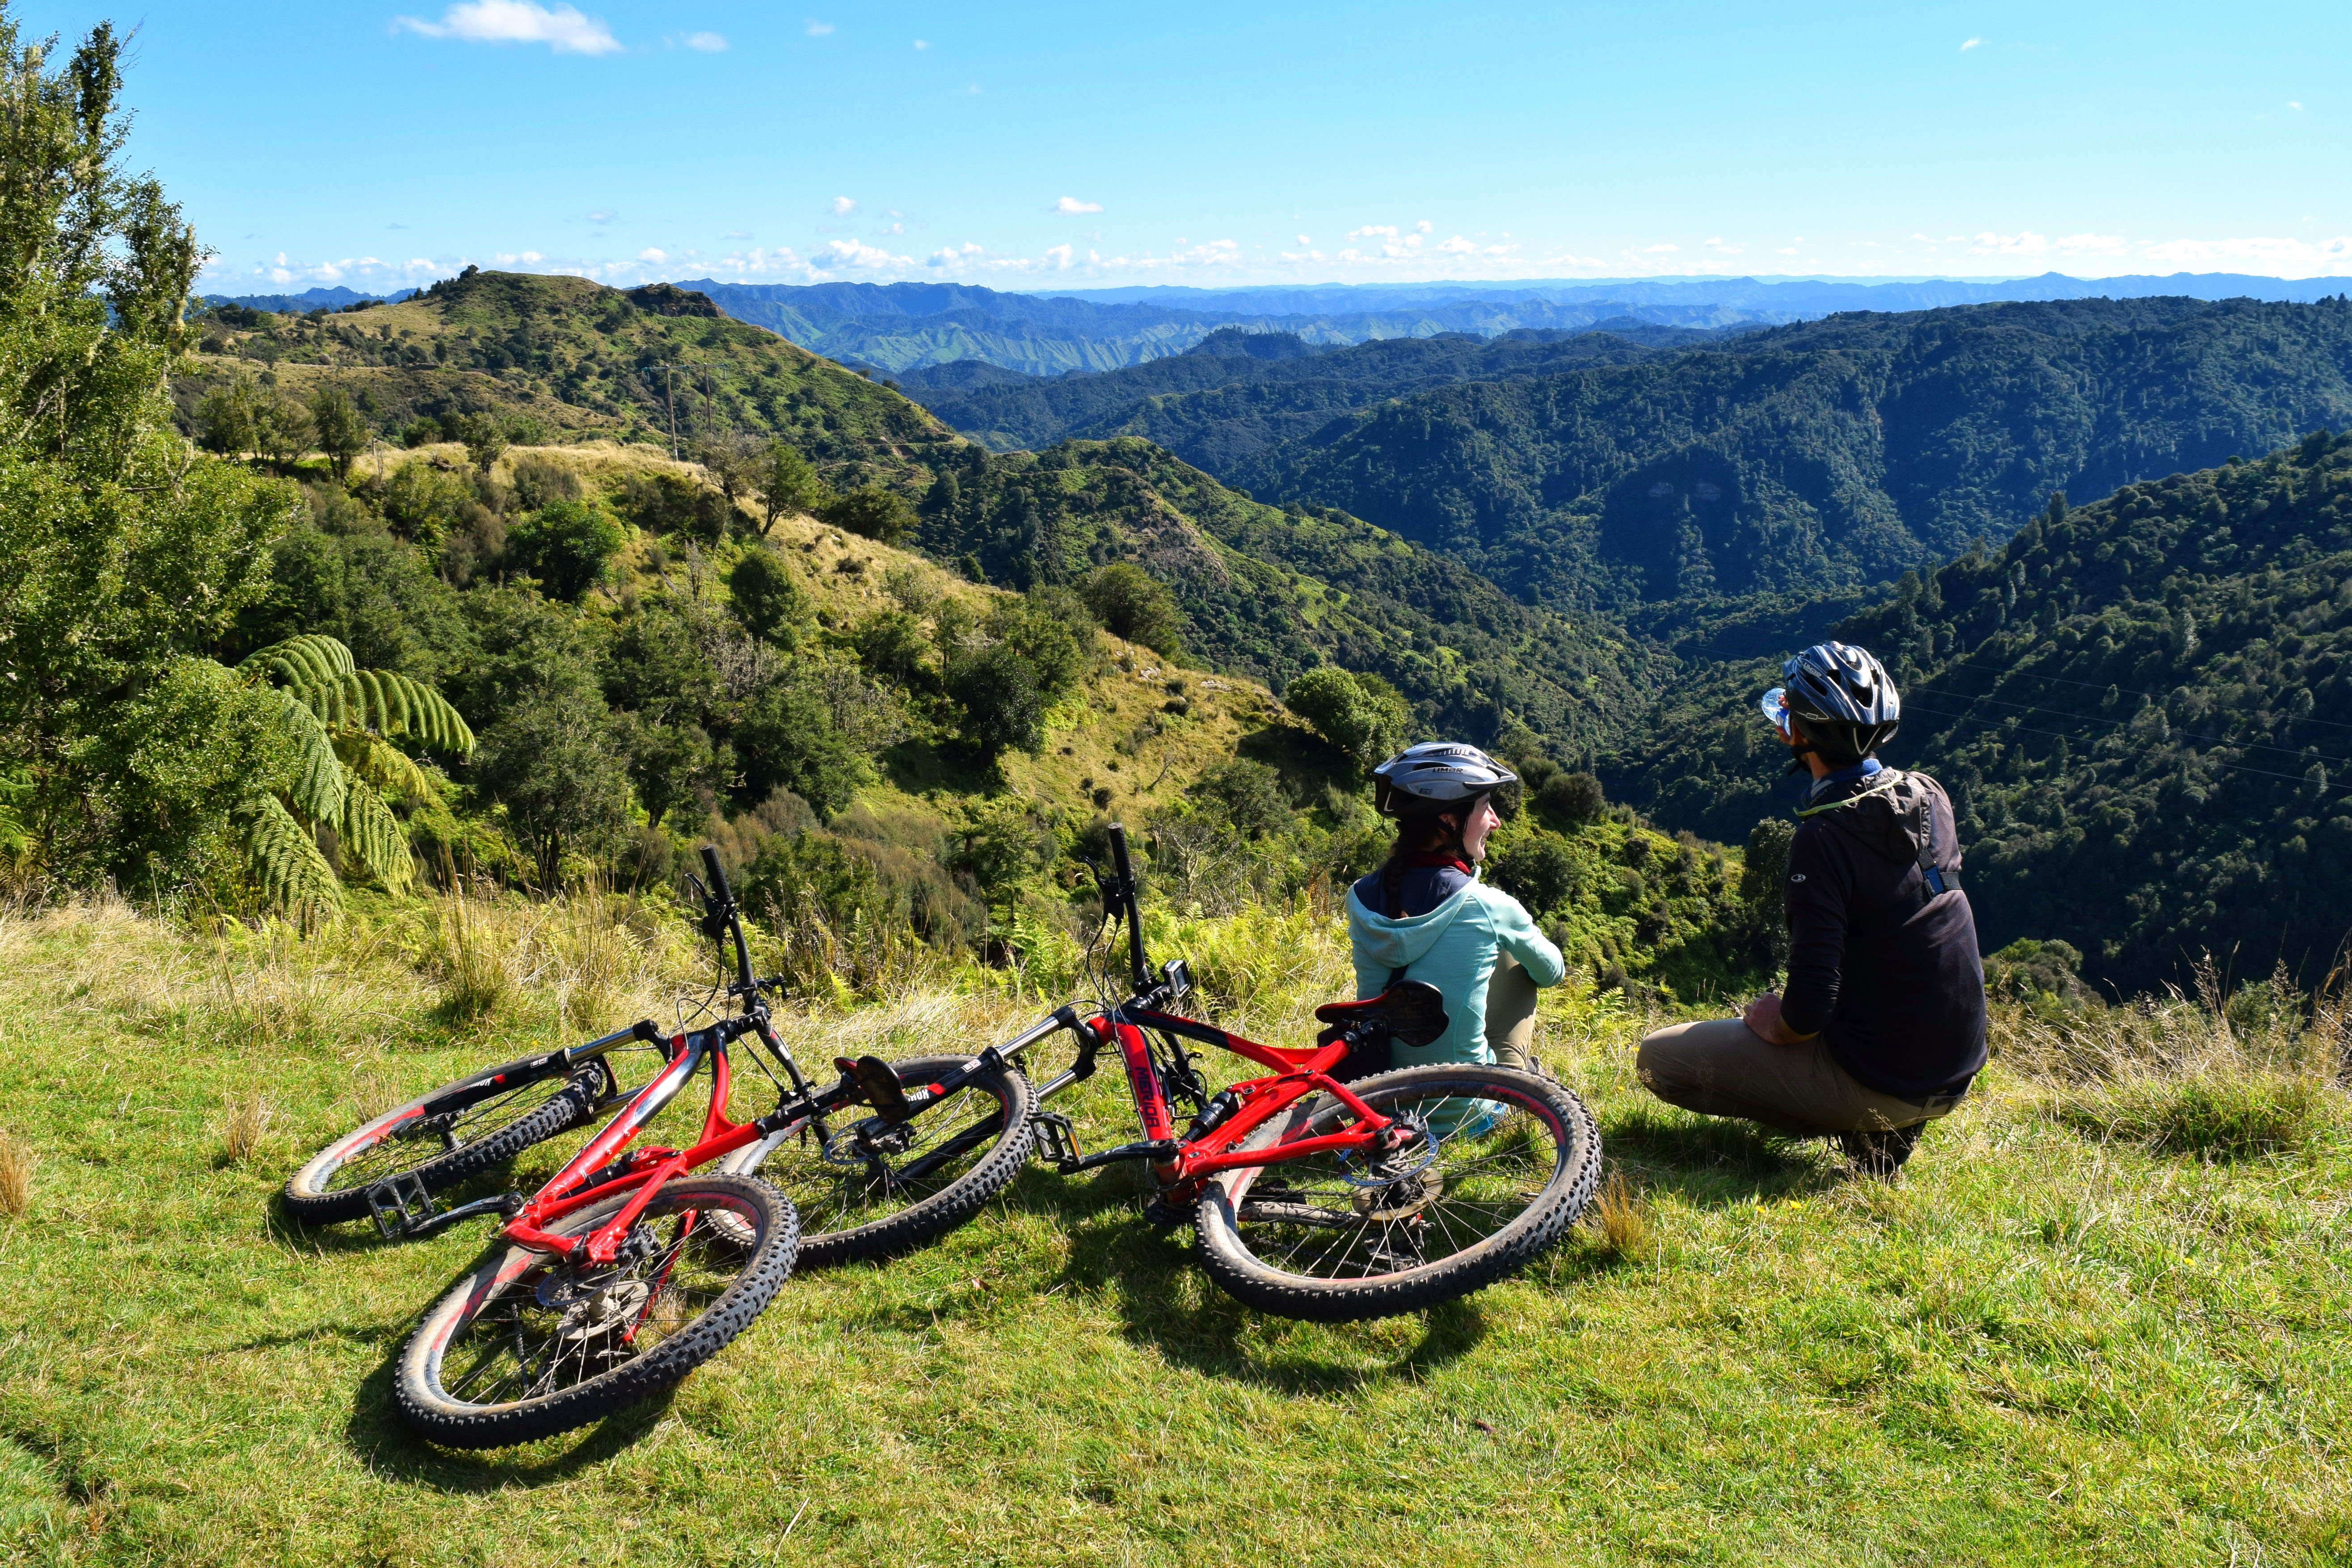 Fishers Track is suited for intermediate riders. Photo Credit: Backpackerguide.nz